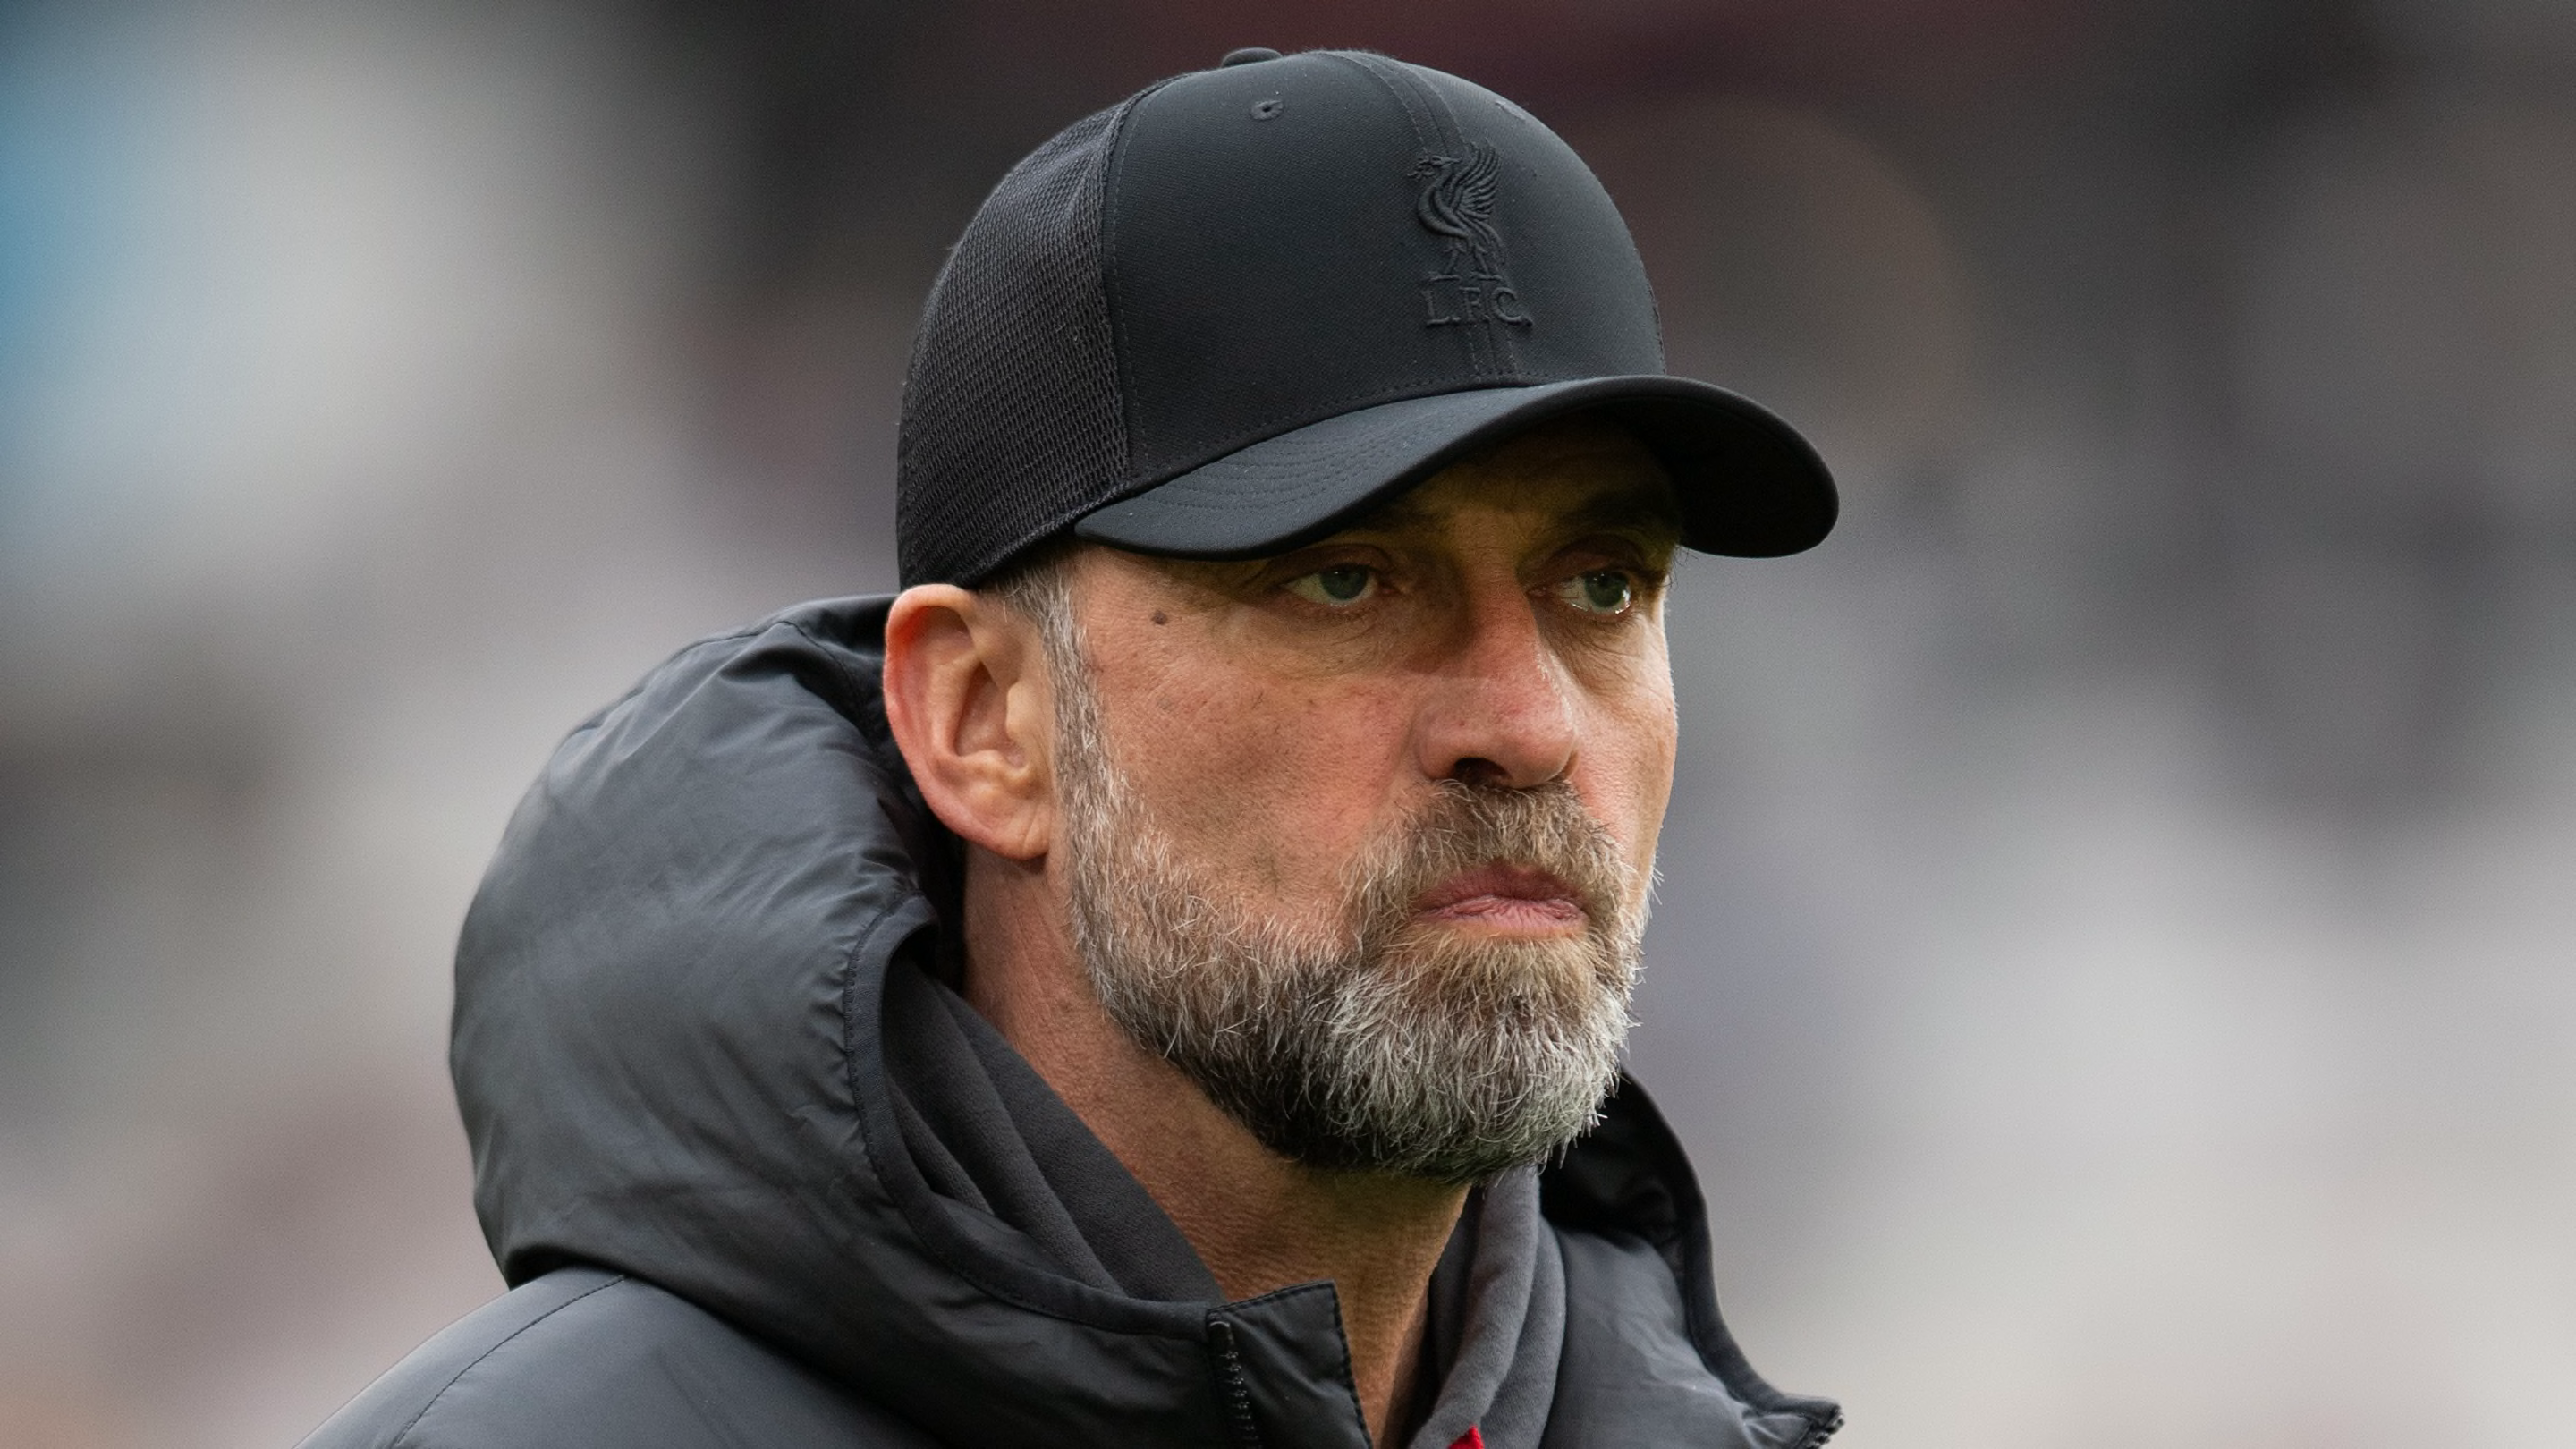 Jurgen Klopp discusses risk of missing Anfield farewell ahead of Liverpool exit